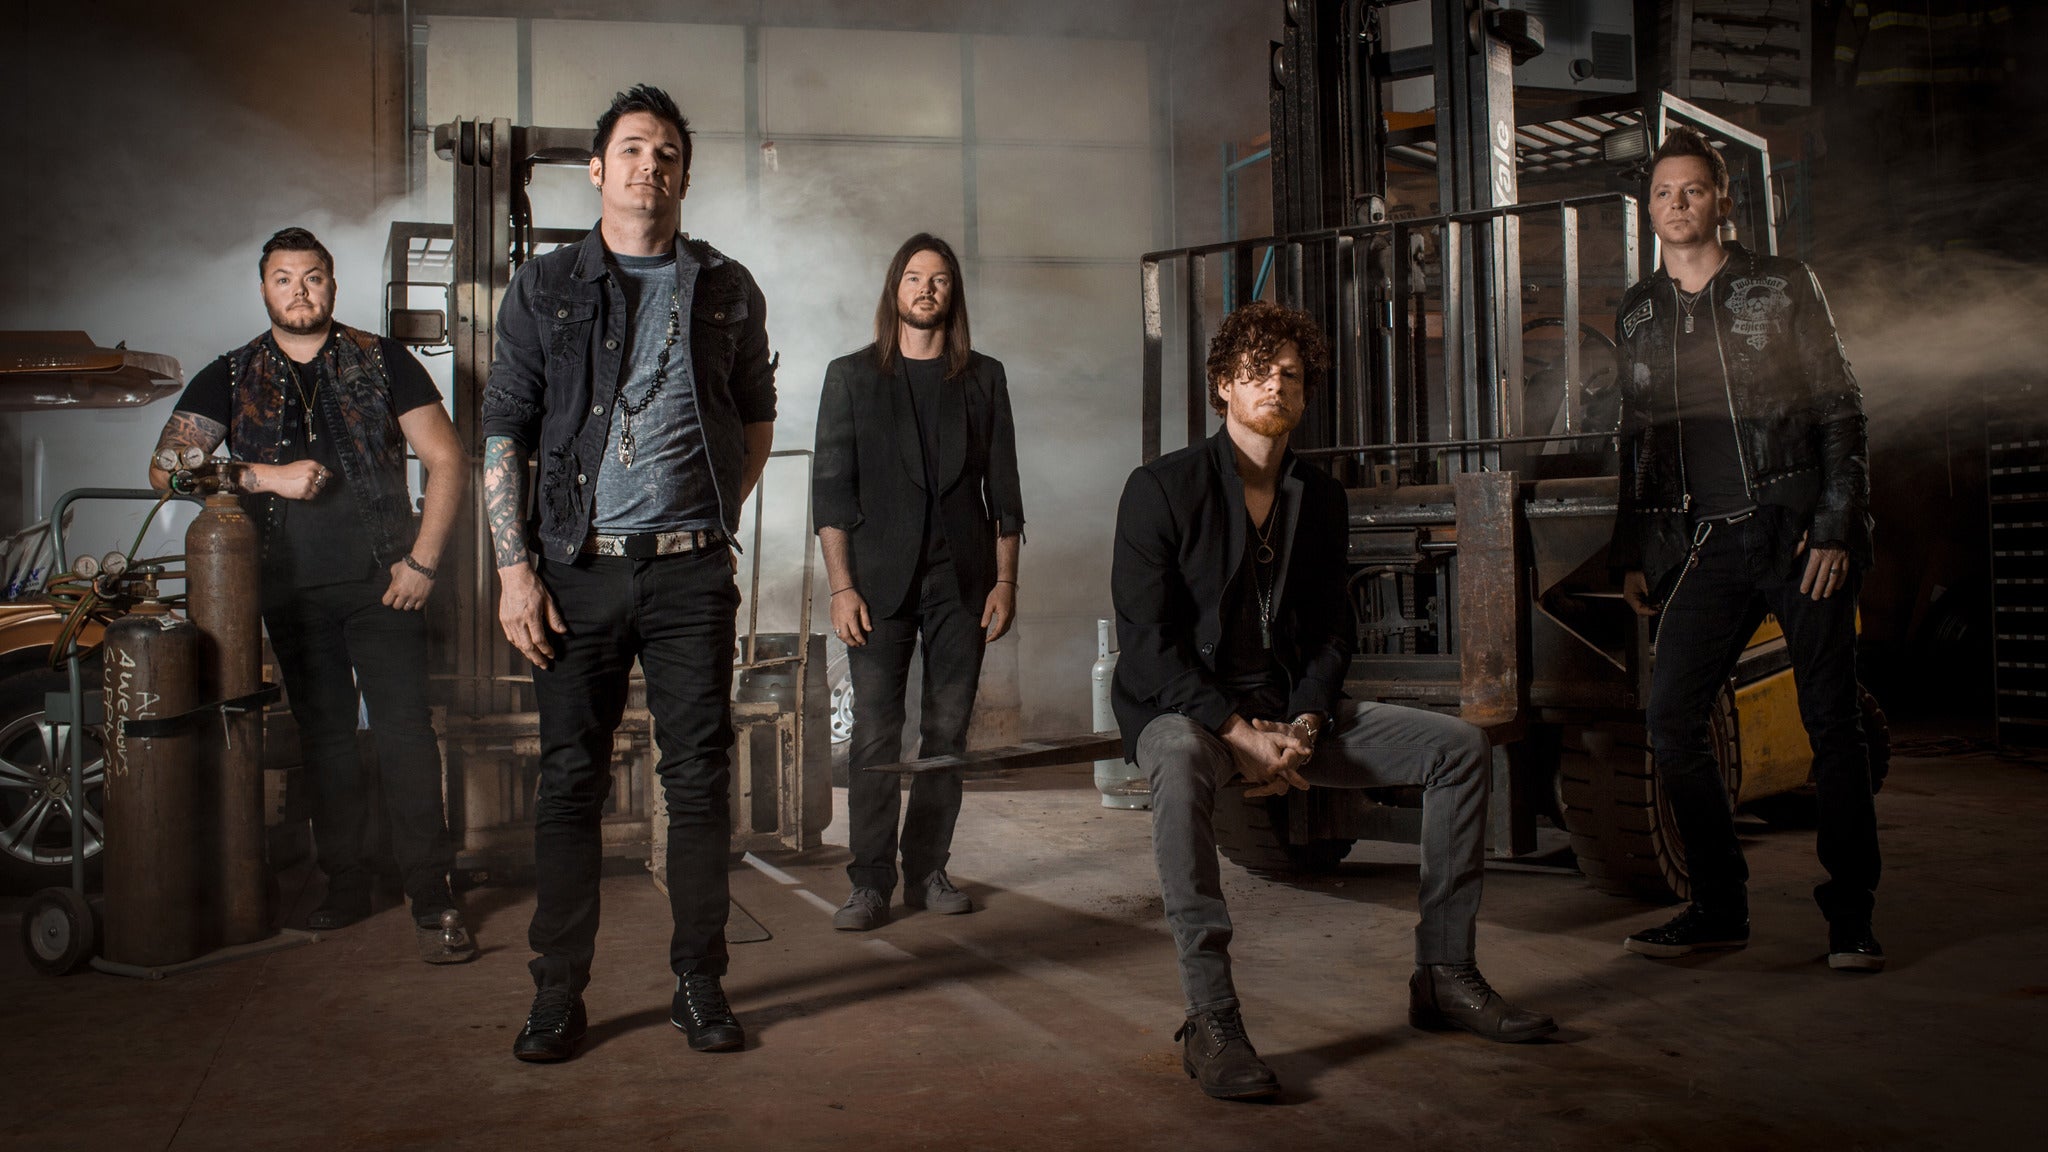 Hinder in Waukegan promo photo for Genesee Theatre presale offer code